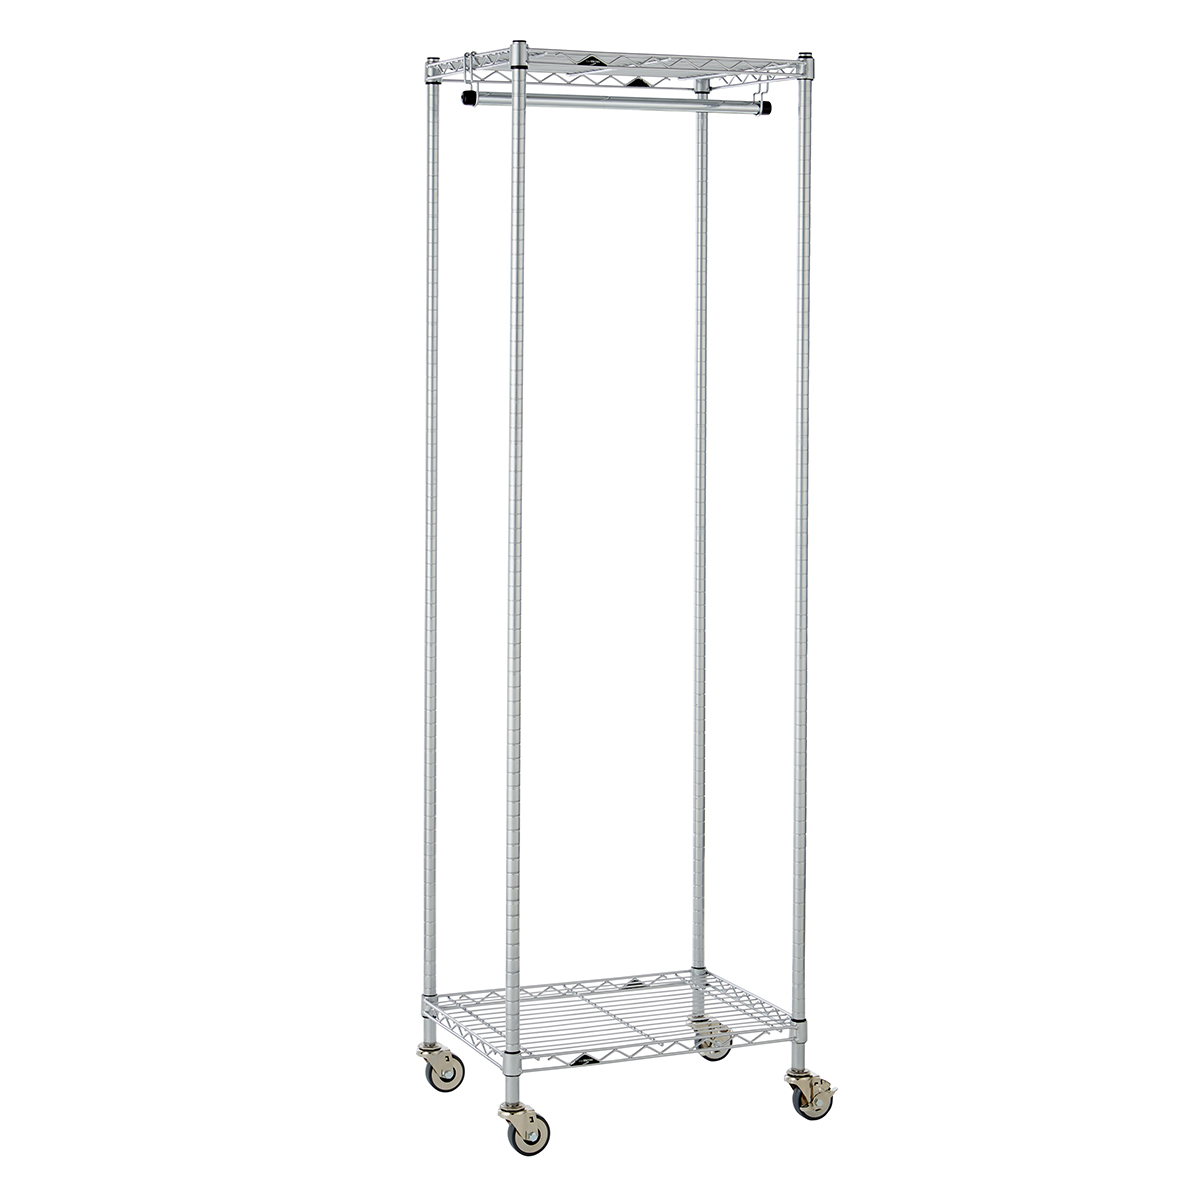 InterMetro Small Clothes Rack | The Container Store